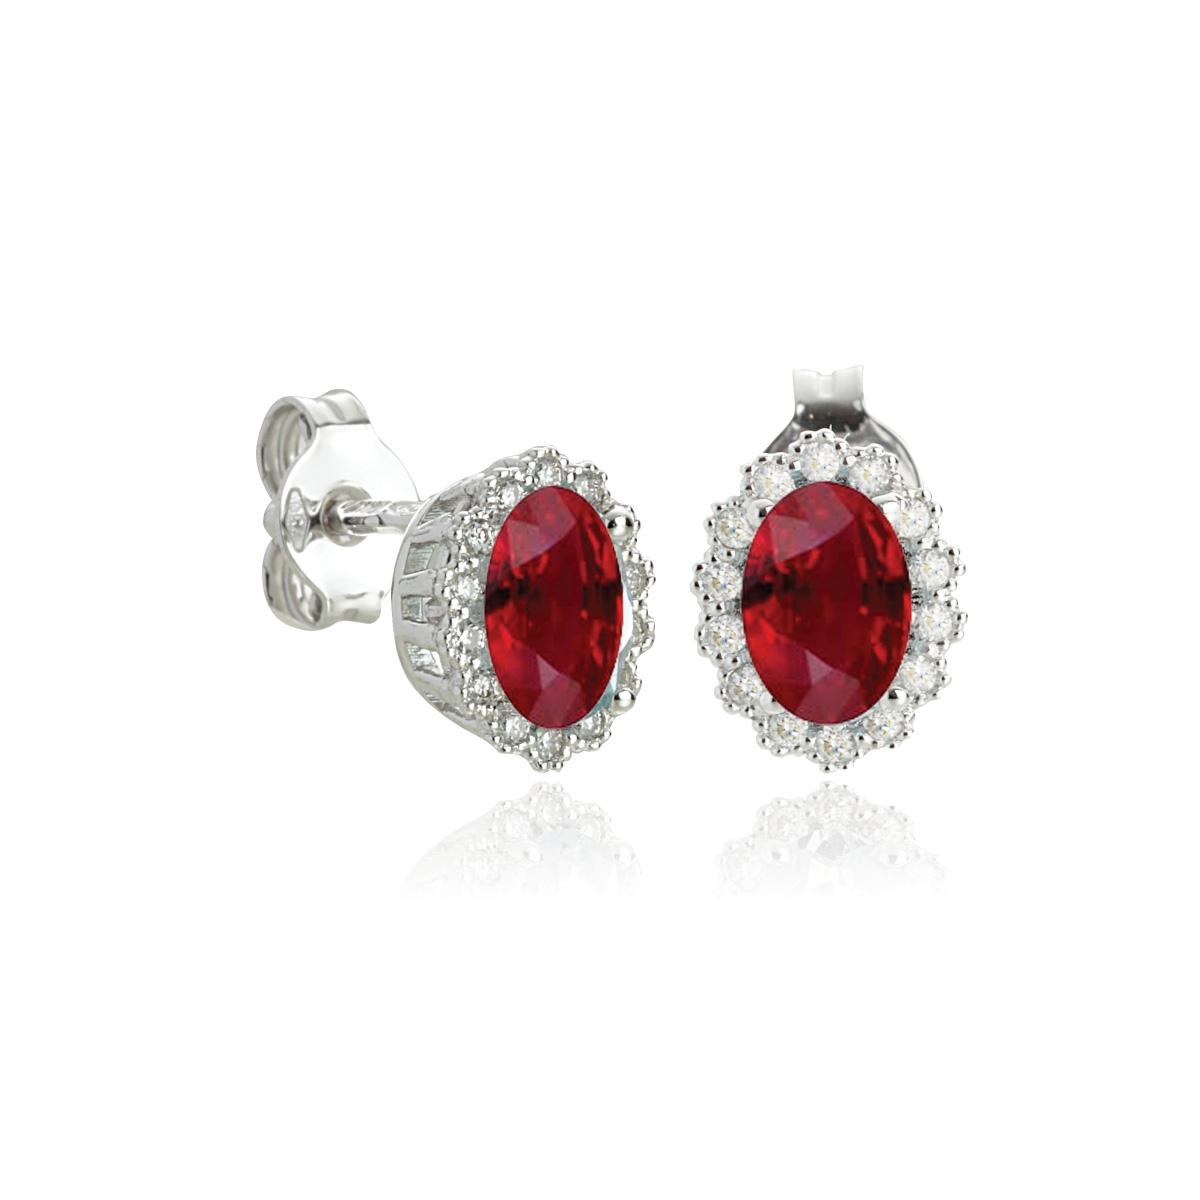 18kt white gold earrings with diamonds and central precious stones - OD438